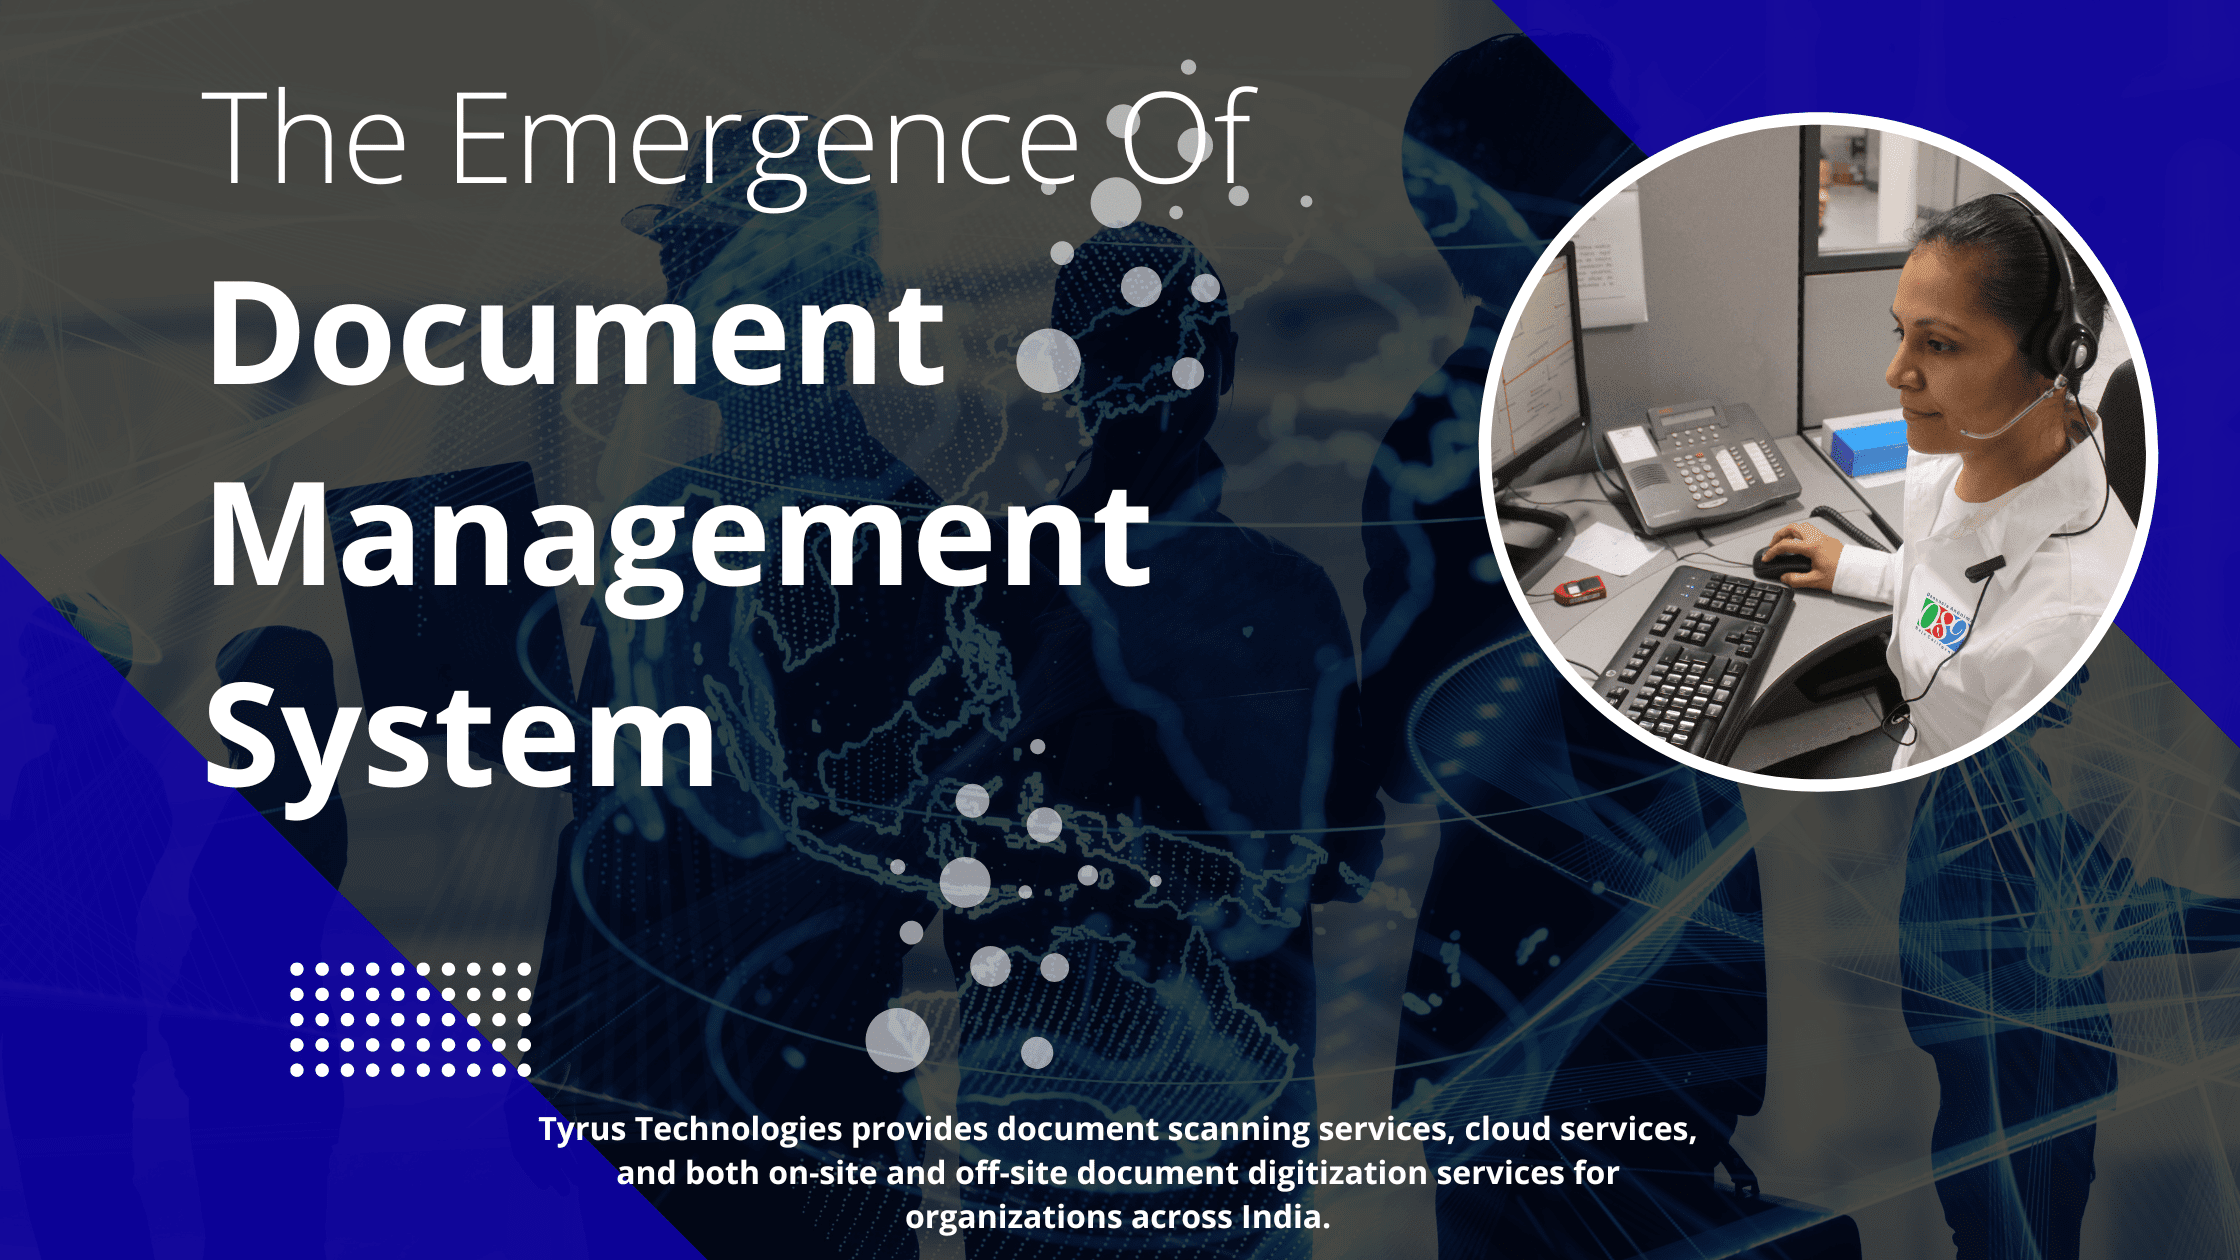 The Emergence Of Document Management System Has Changed The Existing Landscapes Of Many Companies